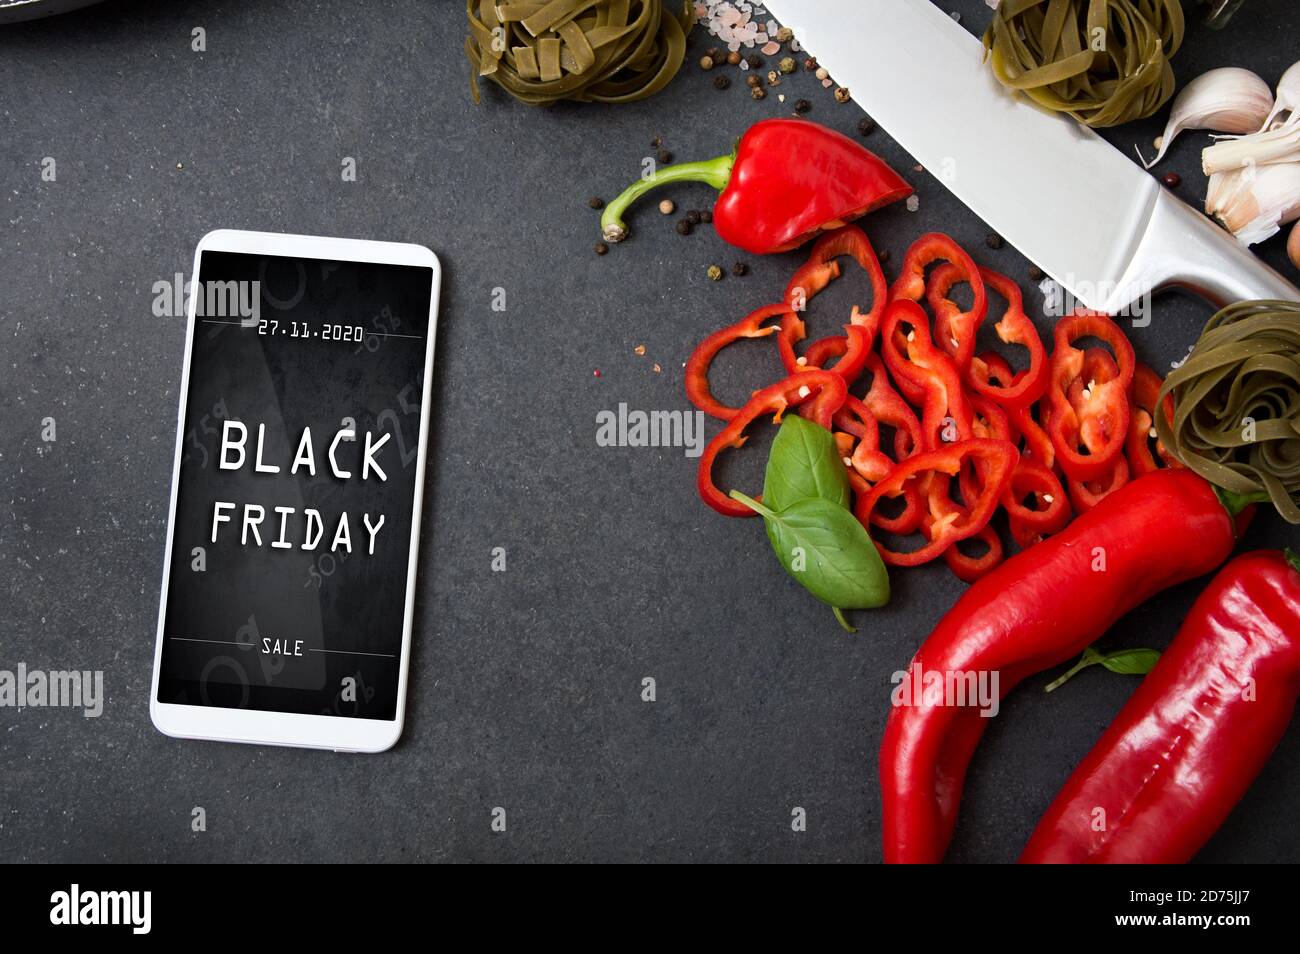 Modern smartphone with black friday banner on the screen lies on countertop with spicy vegetables Stock Photo